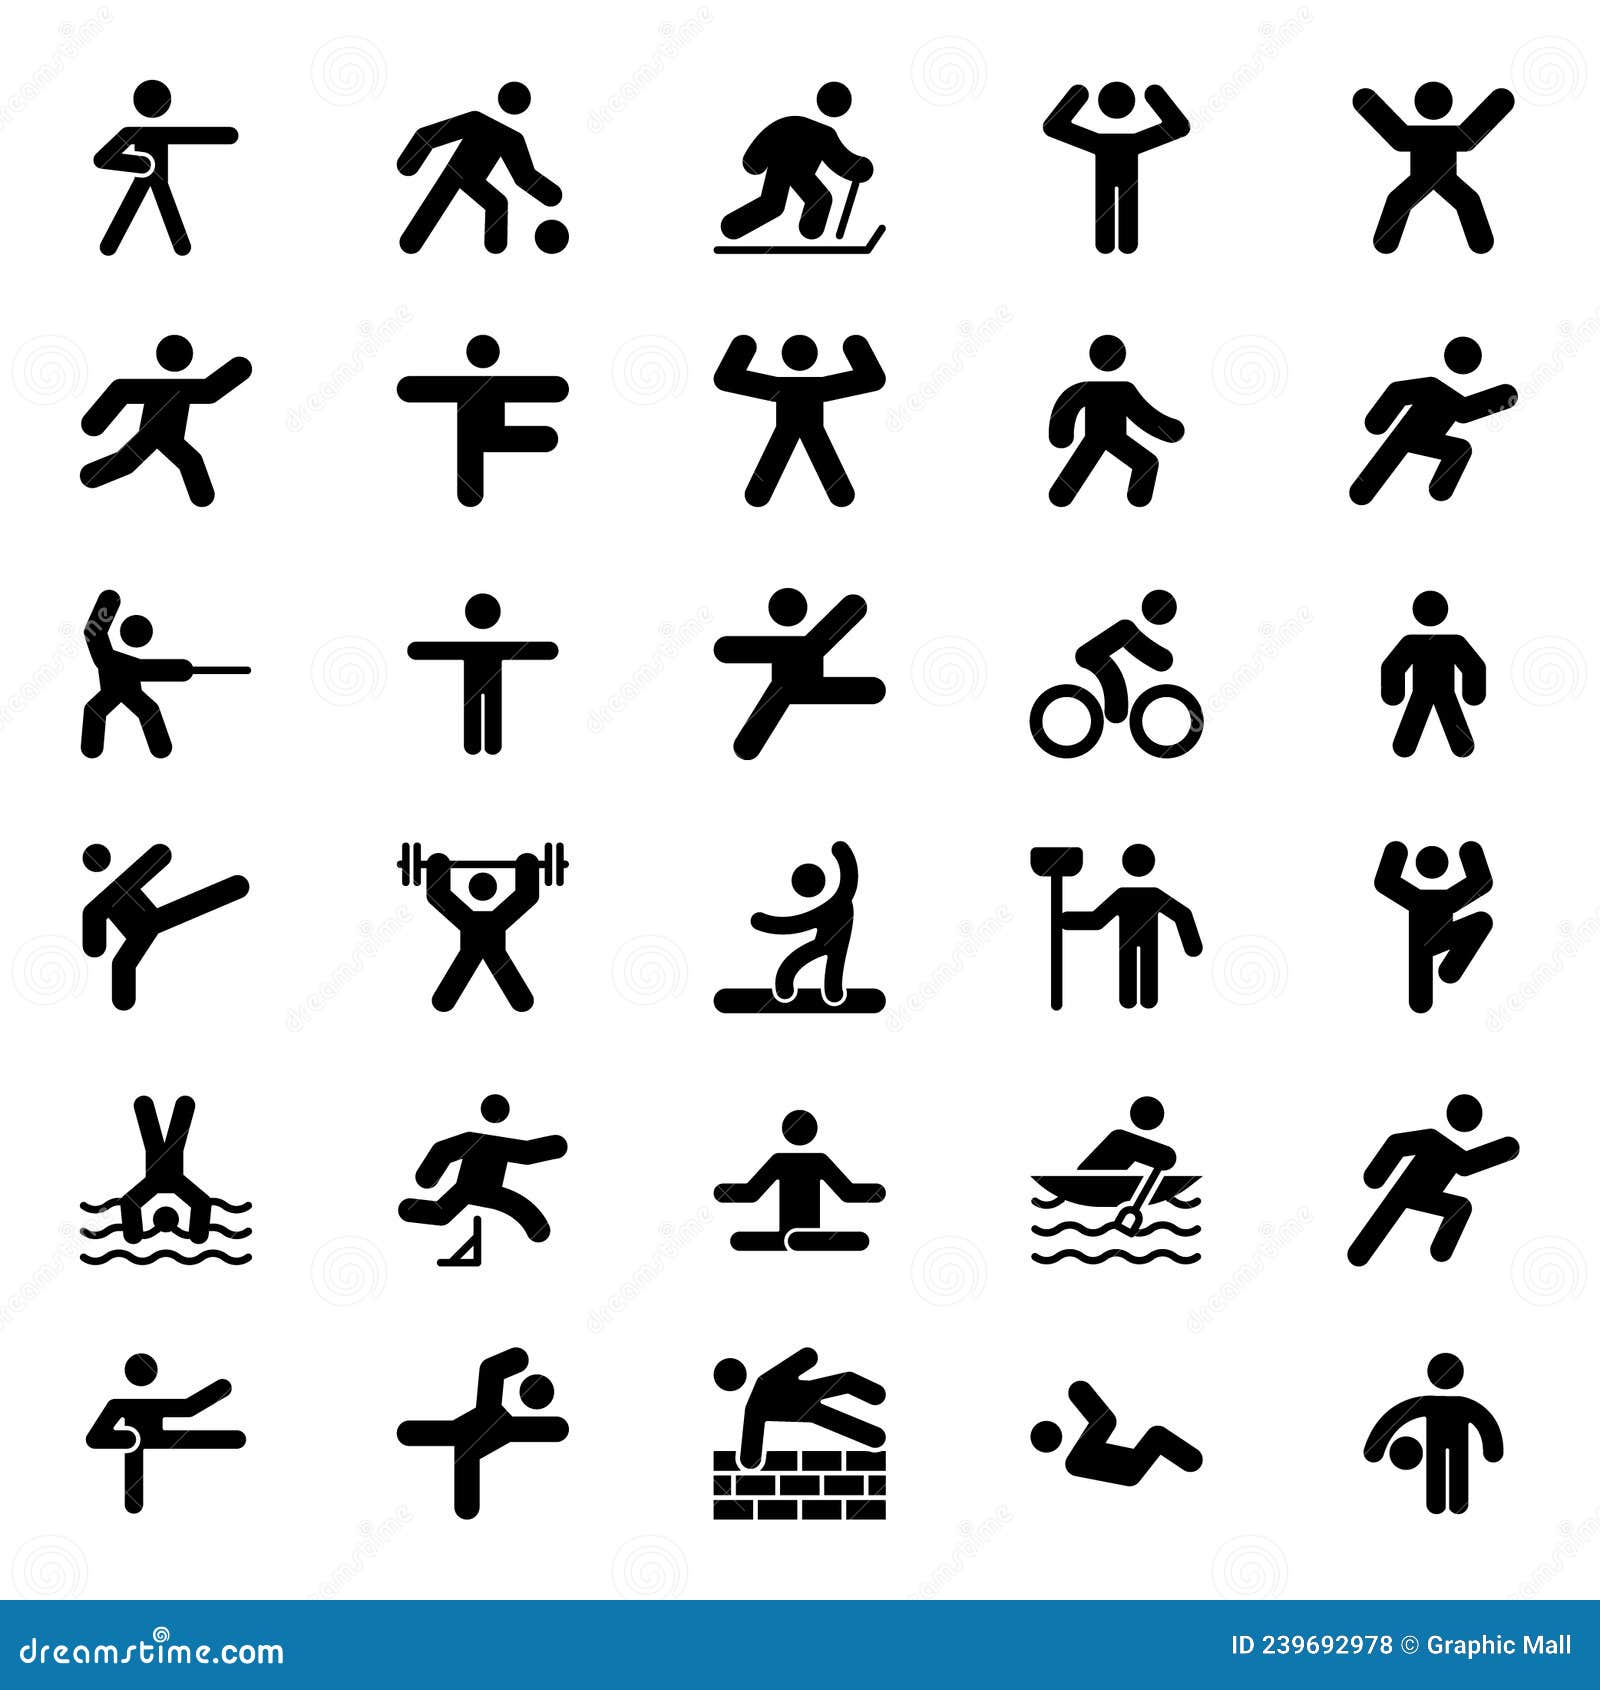 Glyph Icons for Pictograms. Stock Vector - Illustration of pictogram ...